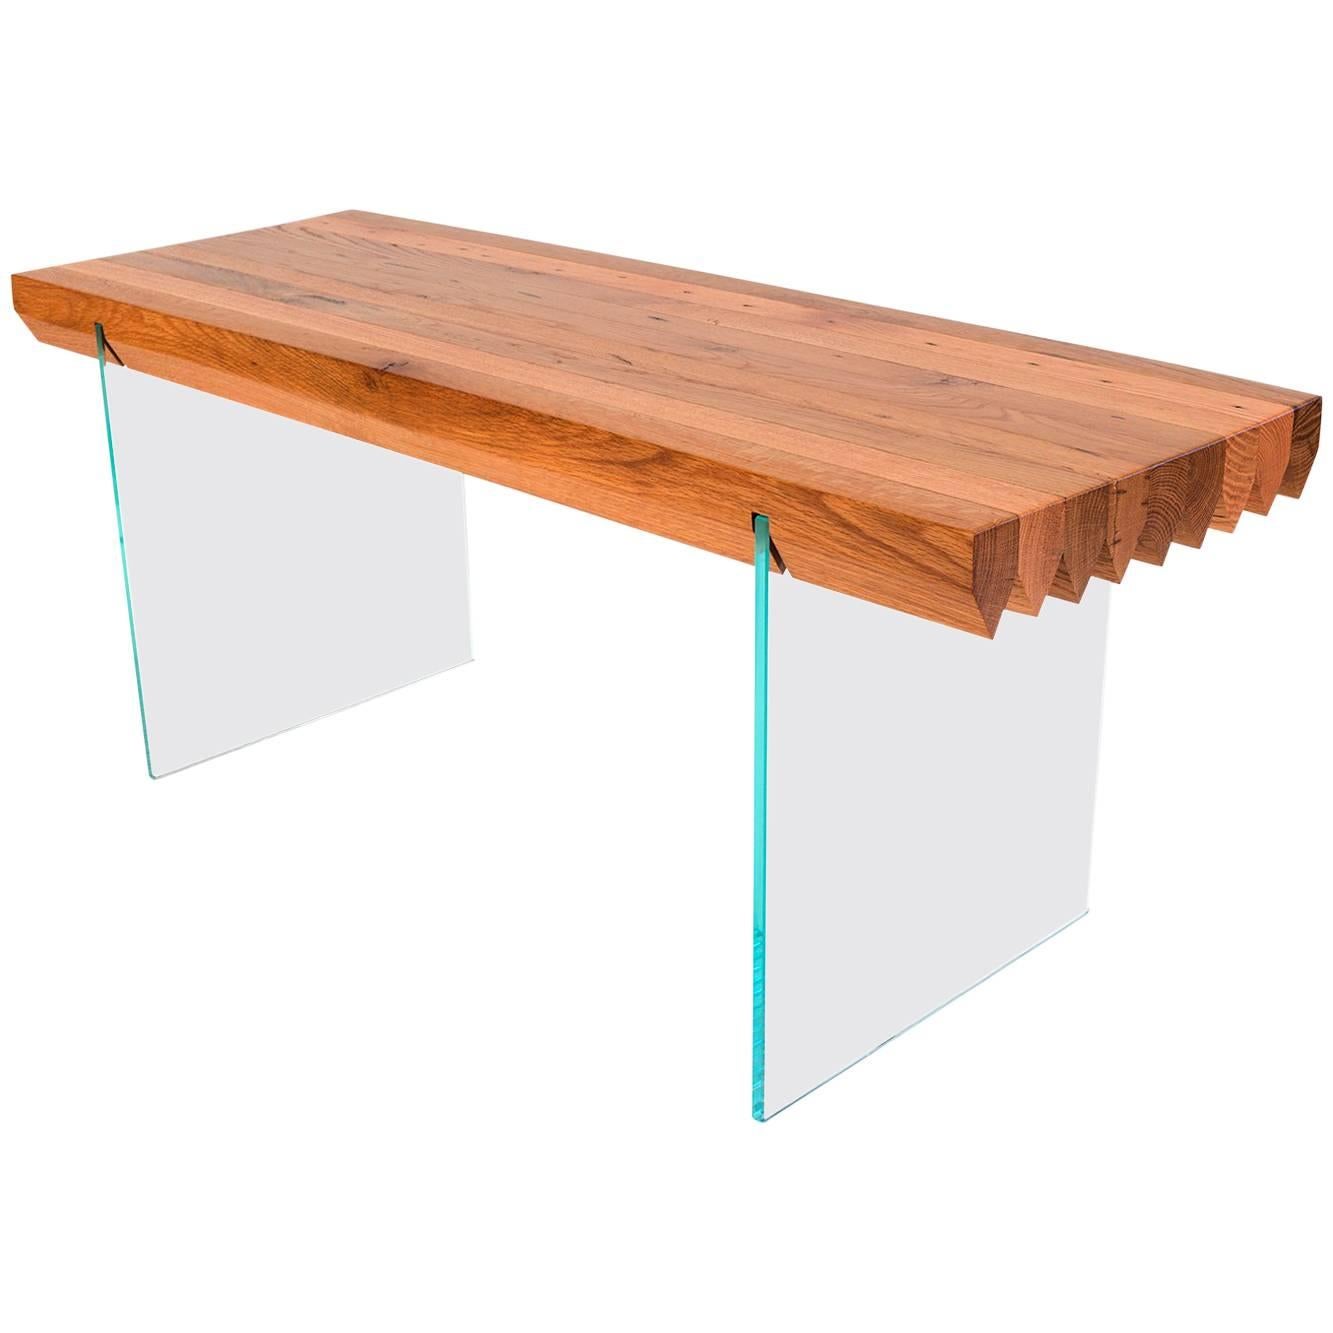 Sawtooth Bench Reclaimed Oak Barn Board and Glass Contemporary Bench For Sale